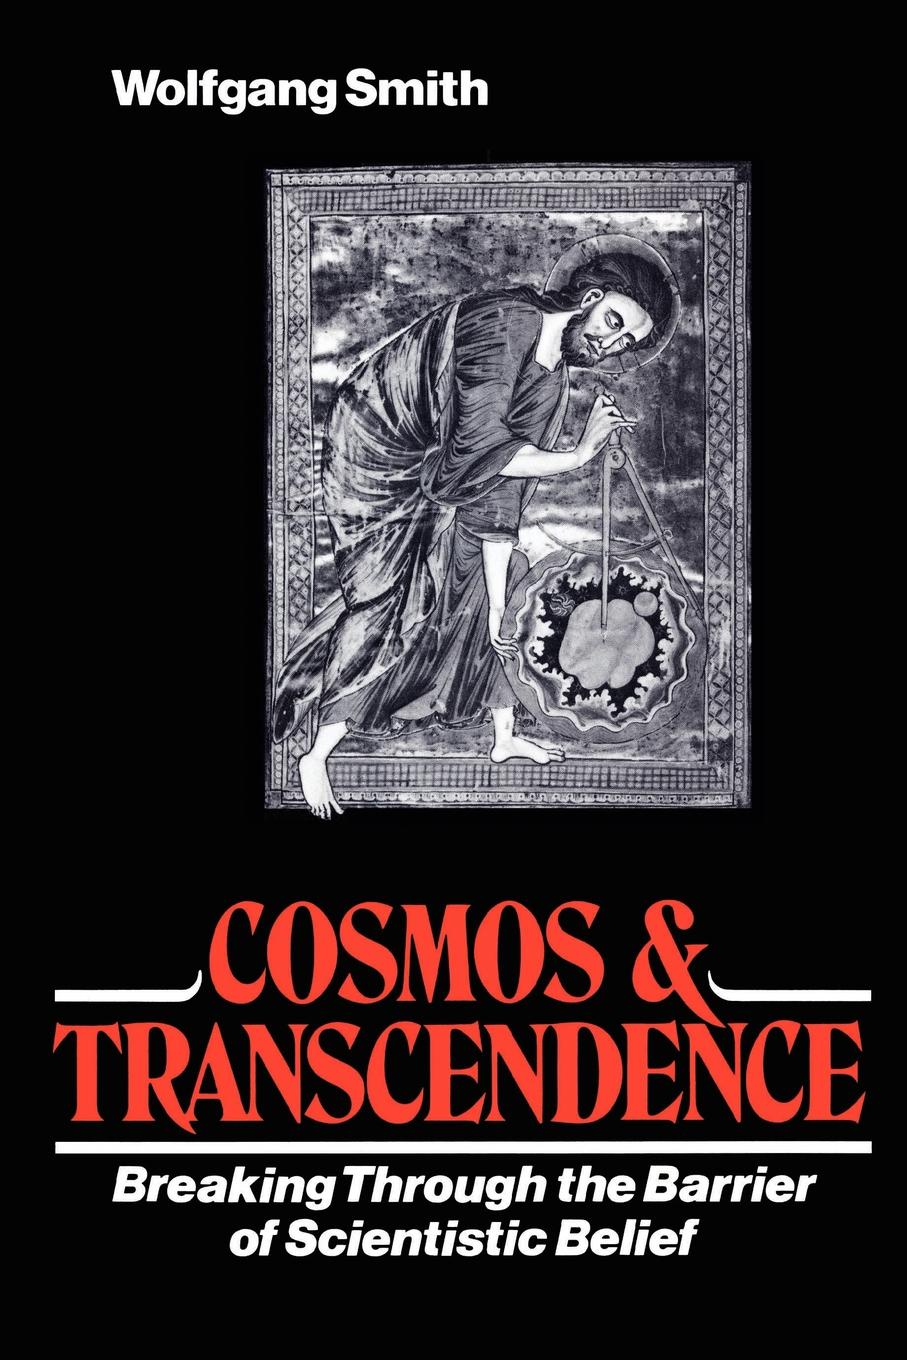 Cosmos & Transcendence. Breaking Through the Barrier of Scientistic Belief